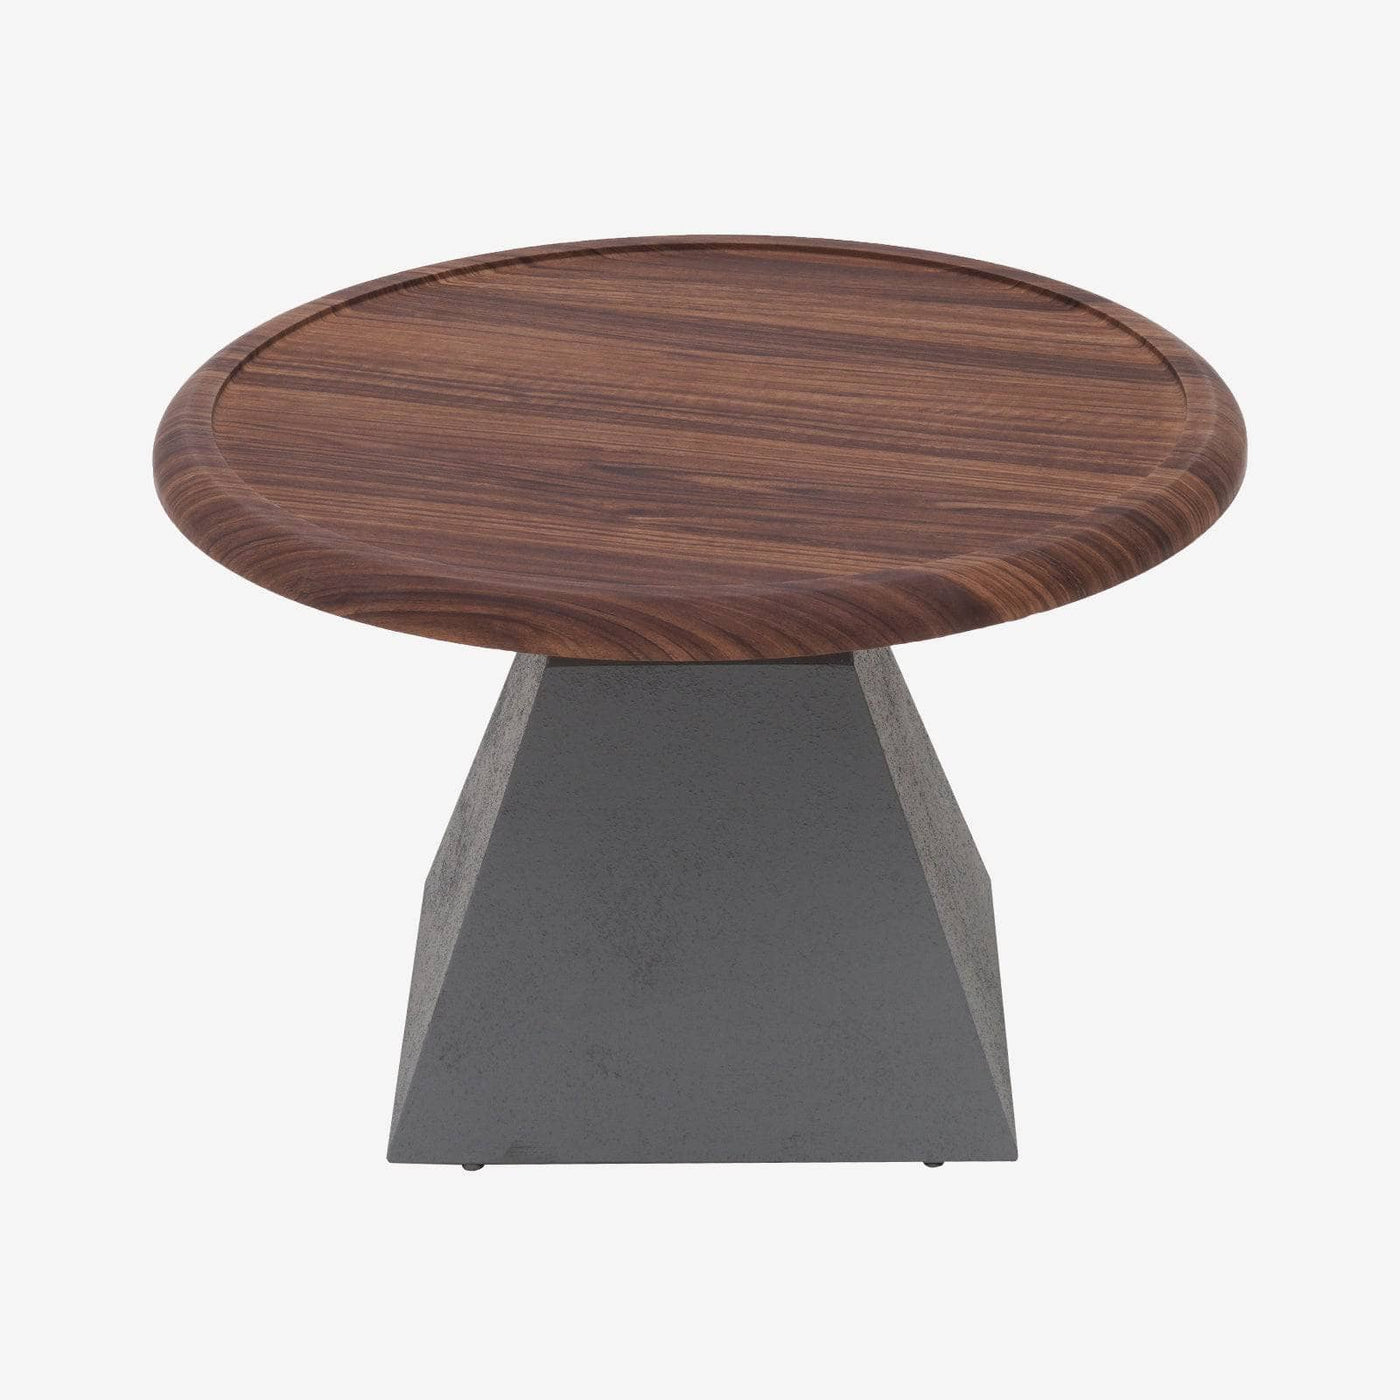 Anders Concrete Look Coffee Table, Wood Coffee Tables sazy.com